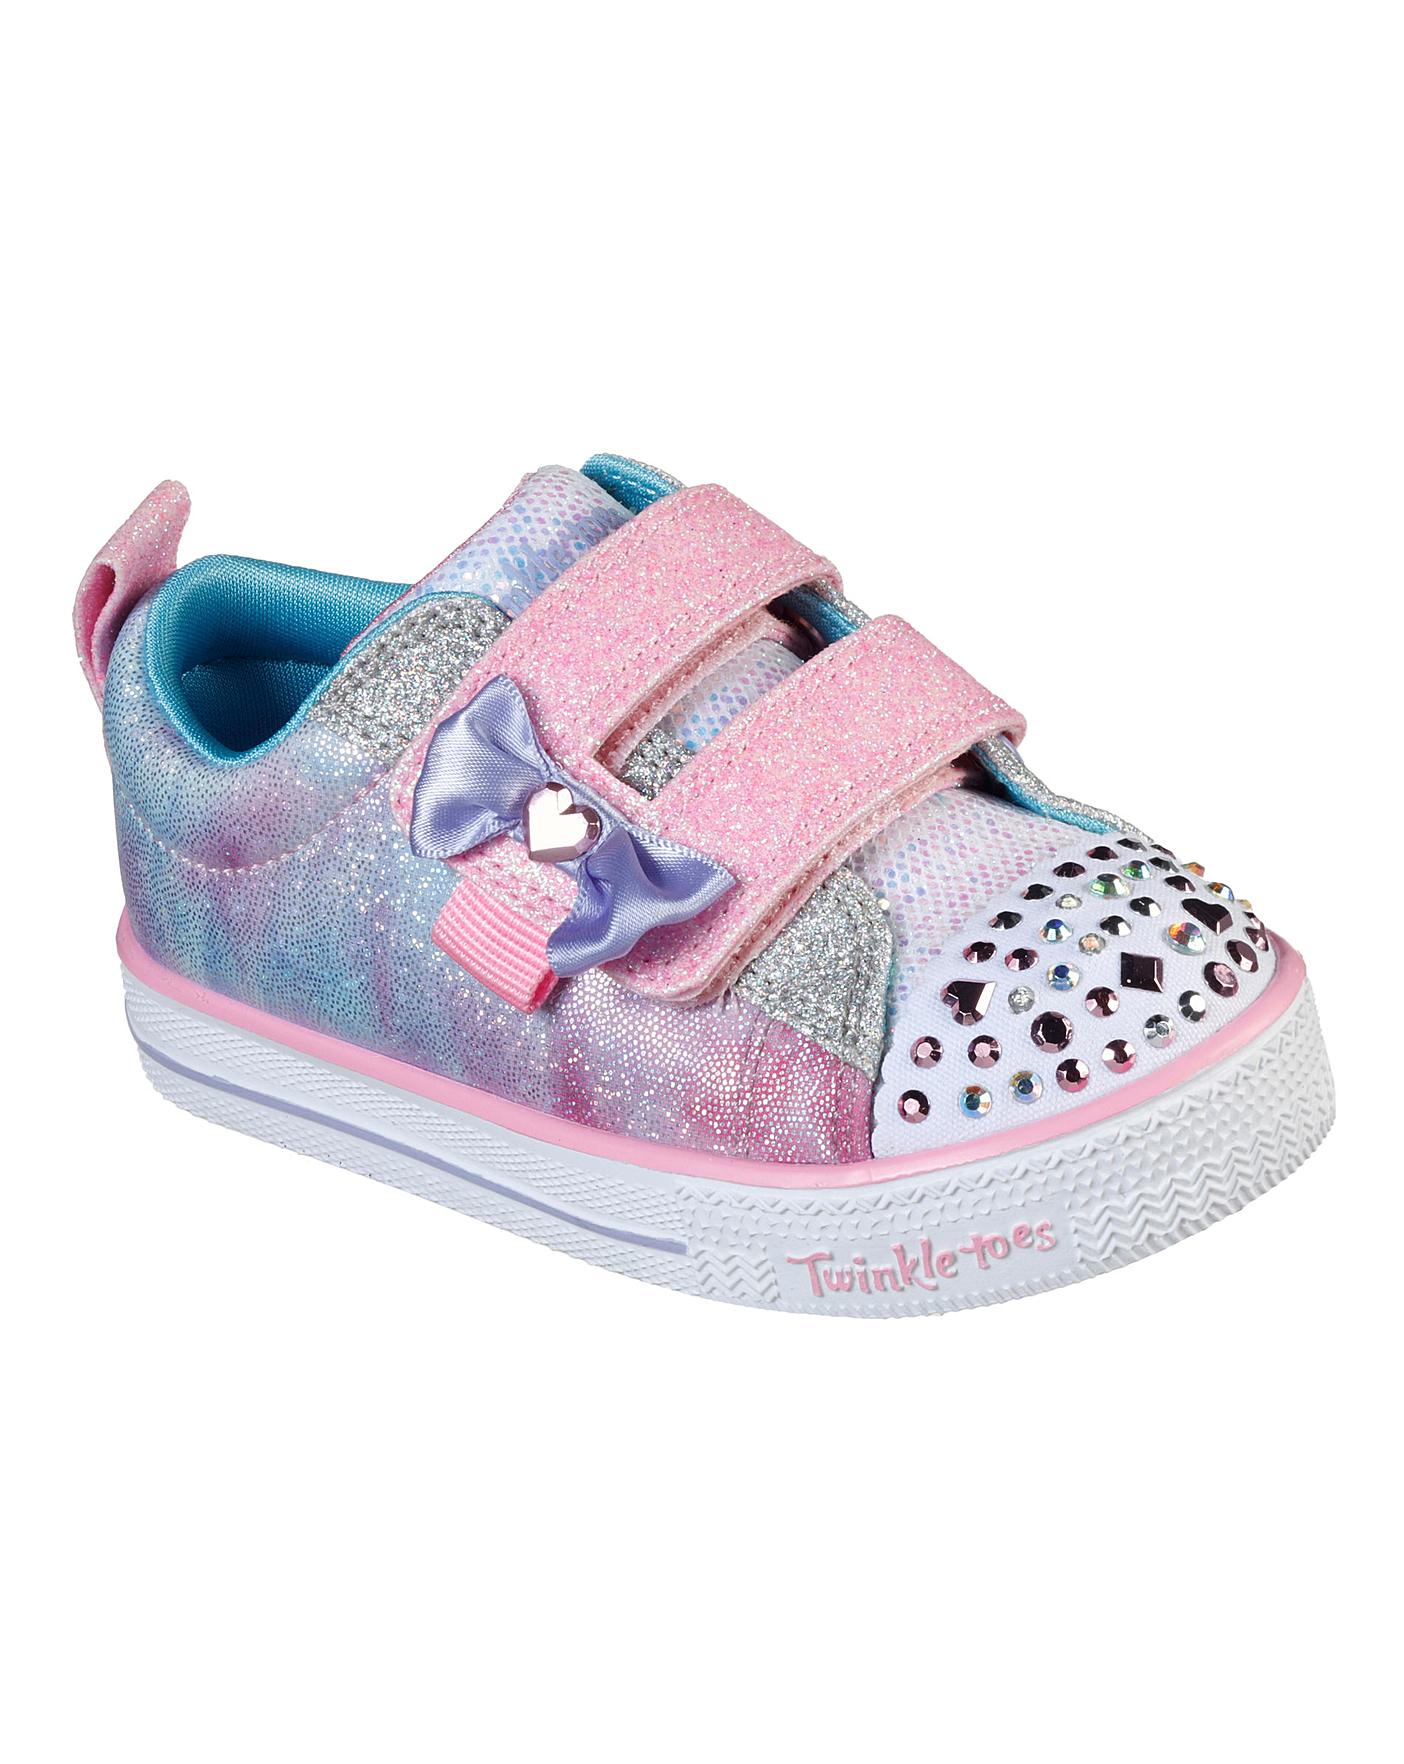 new twinkle toes shoes